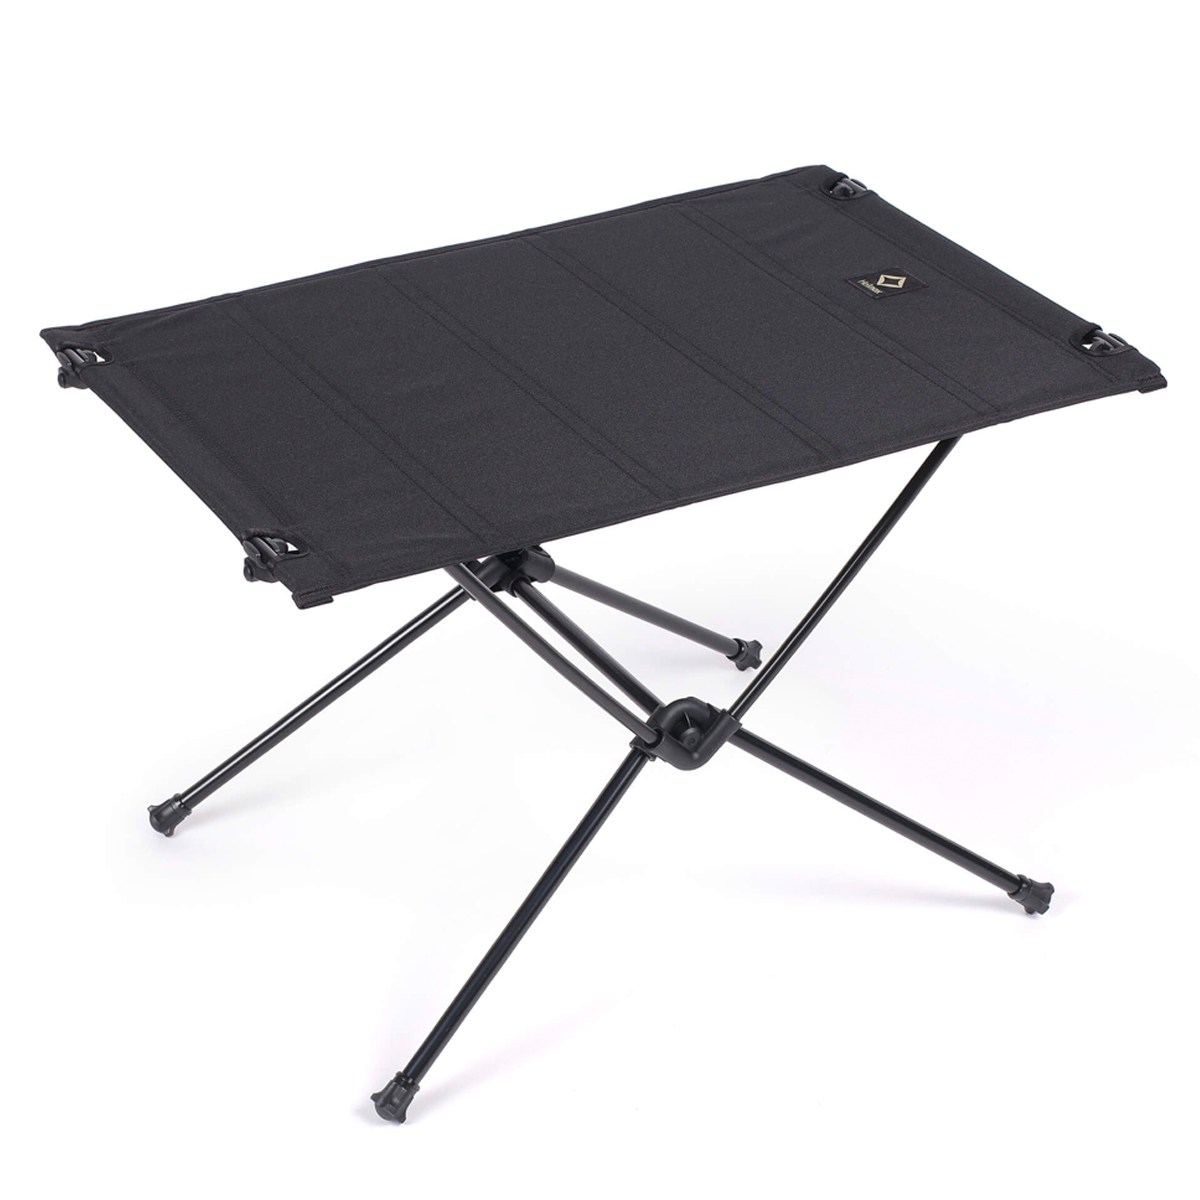 Helinox Tactical Table Regular Black fabric, bluesign®-certified and recycled 600D polyester